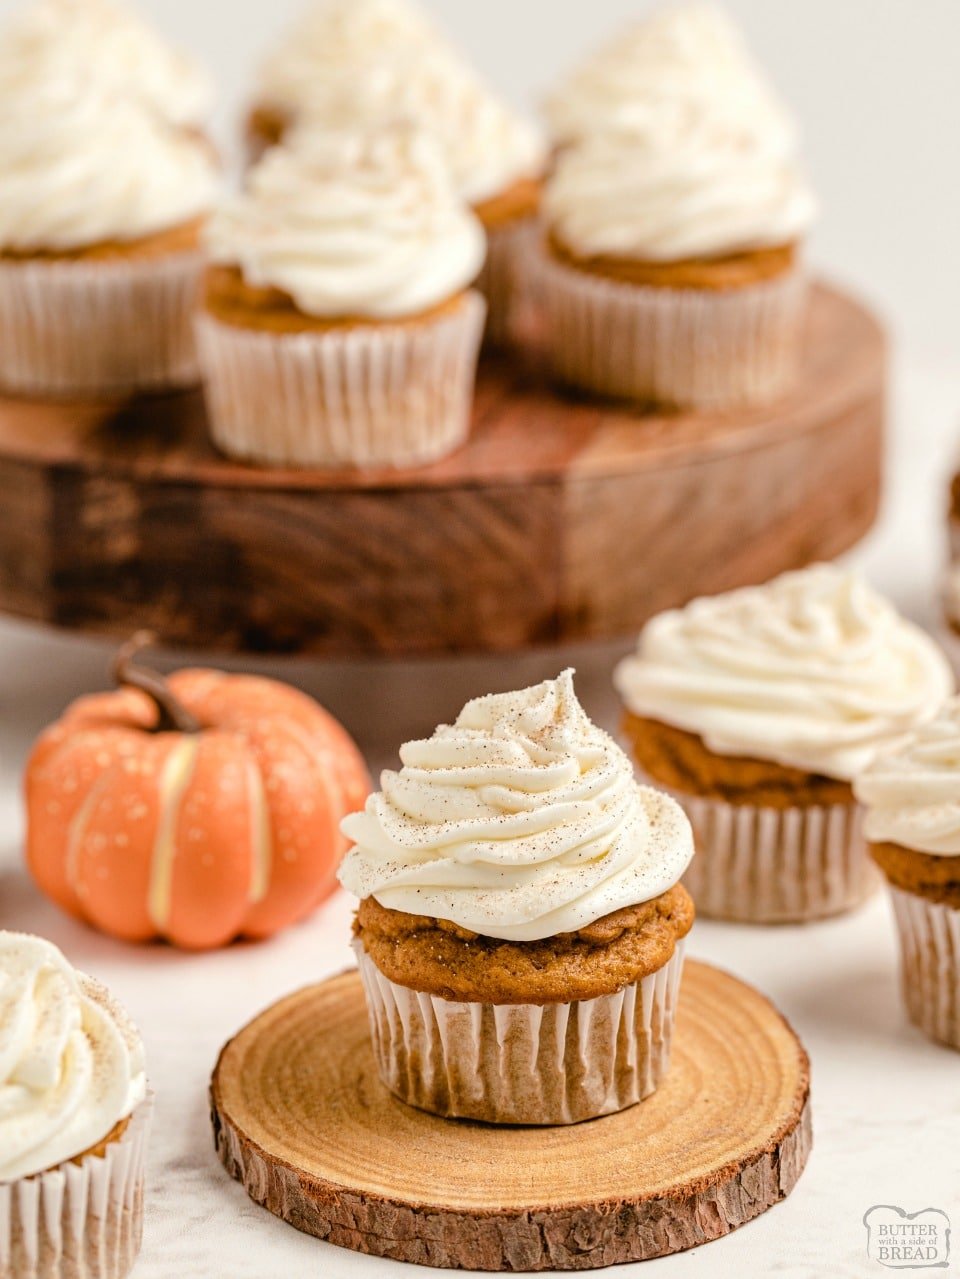 Pumpkin Spice Cupcakes with Cream Cheese Frosting are the perfect little treats for celebrating Fall! Easy recipe that starts with yellow cake mix and yields soft, moist perfectly spiced pumpkin cupcakes! 